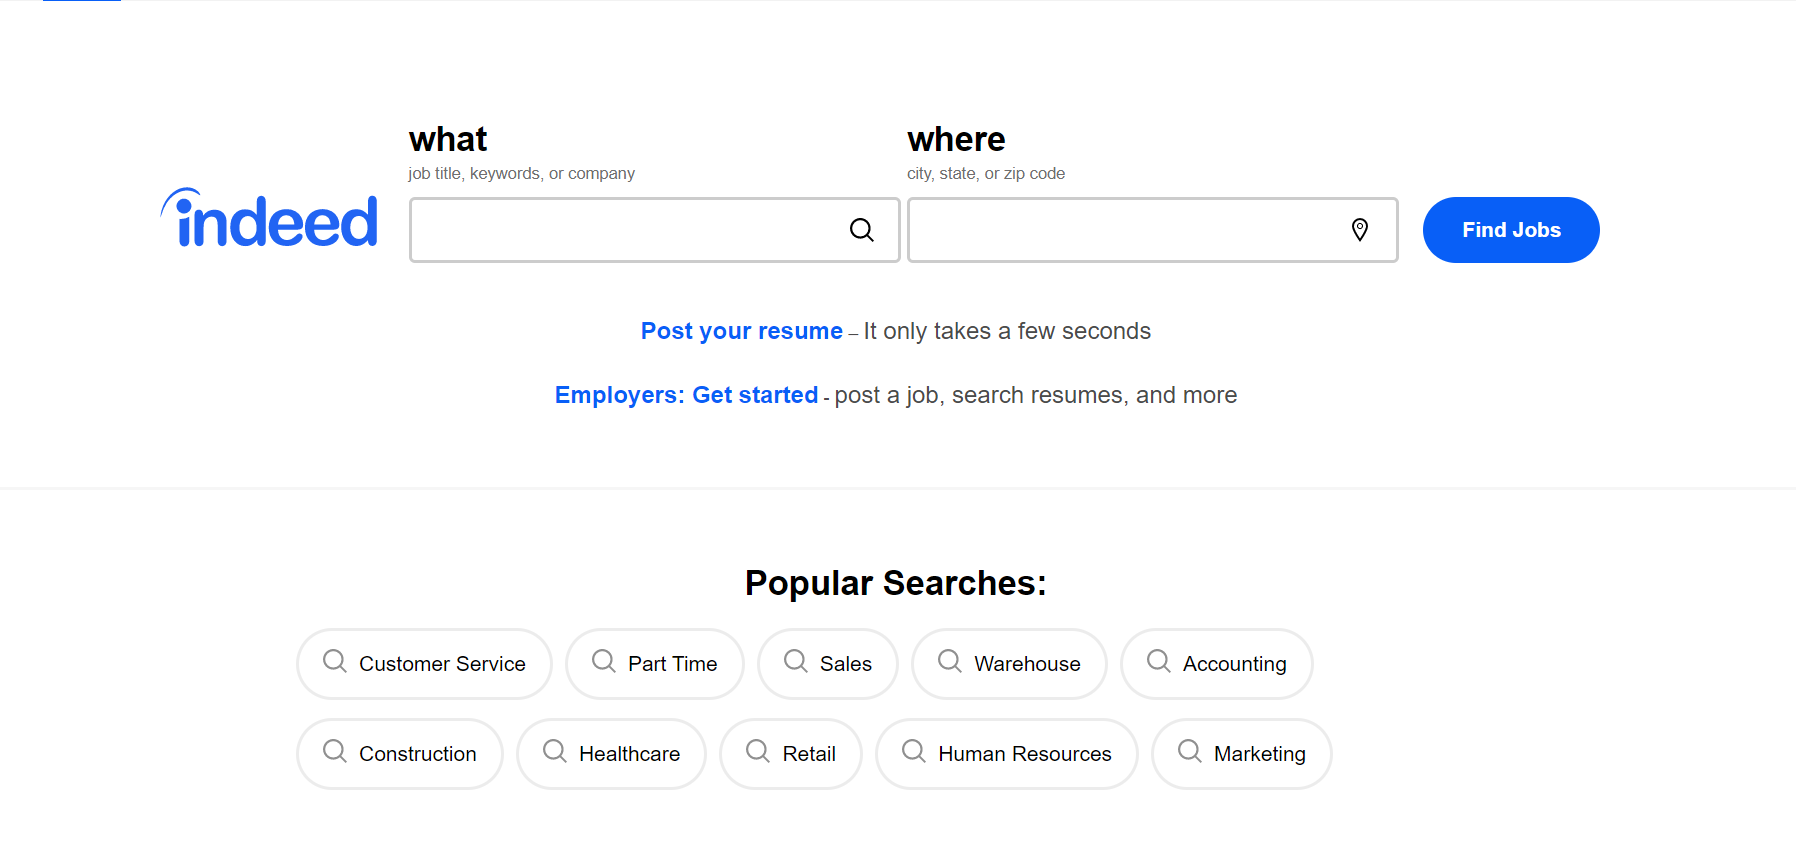 40 Great Job Internet Sites And Search Engines For Entry Level Jobs »